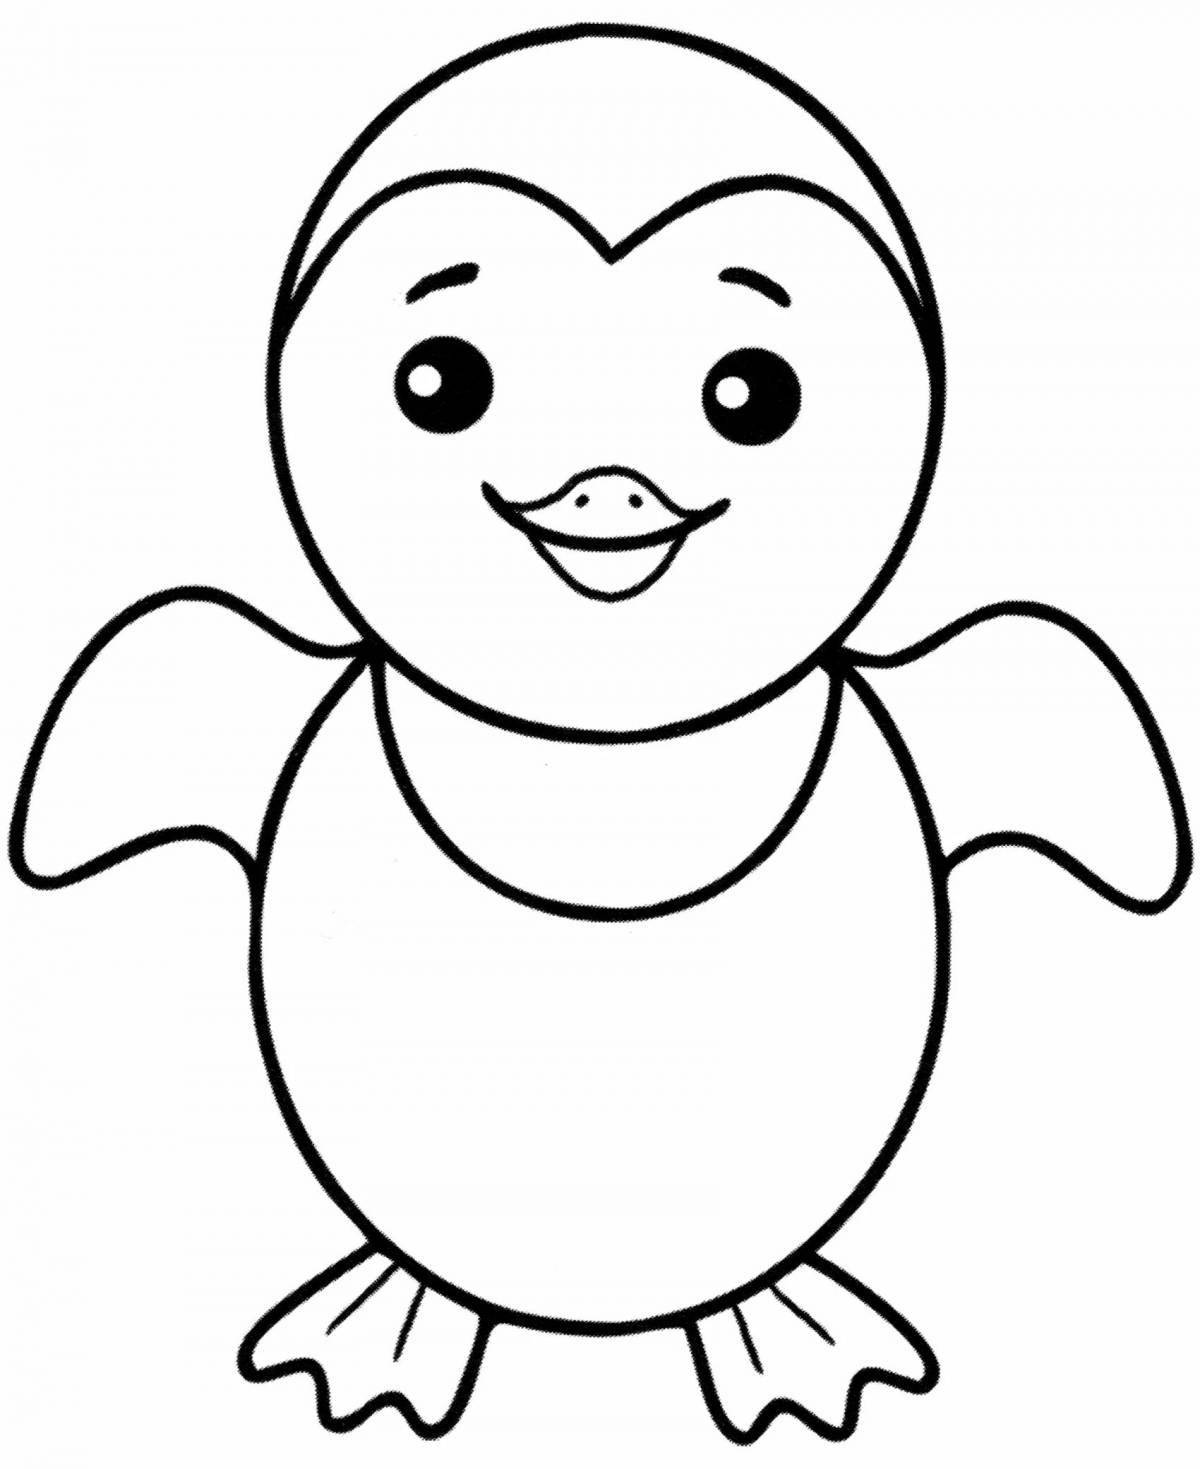 Funny penguin coloring book